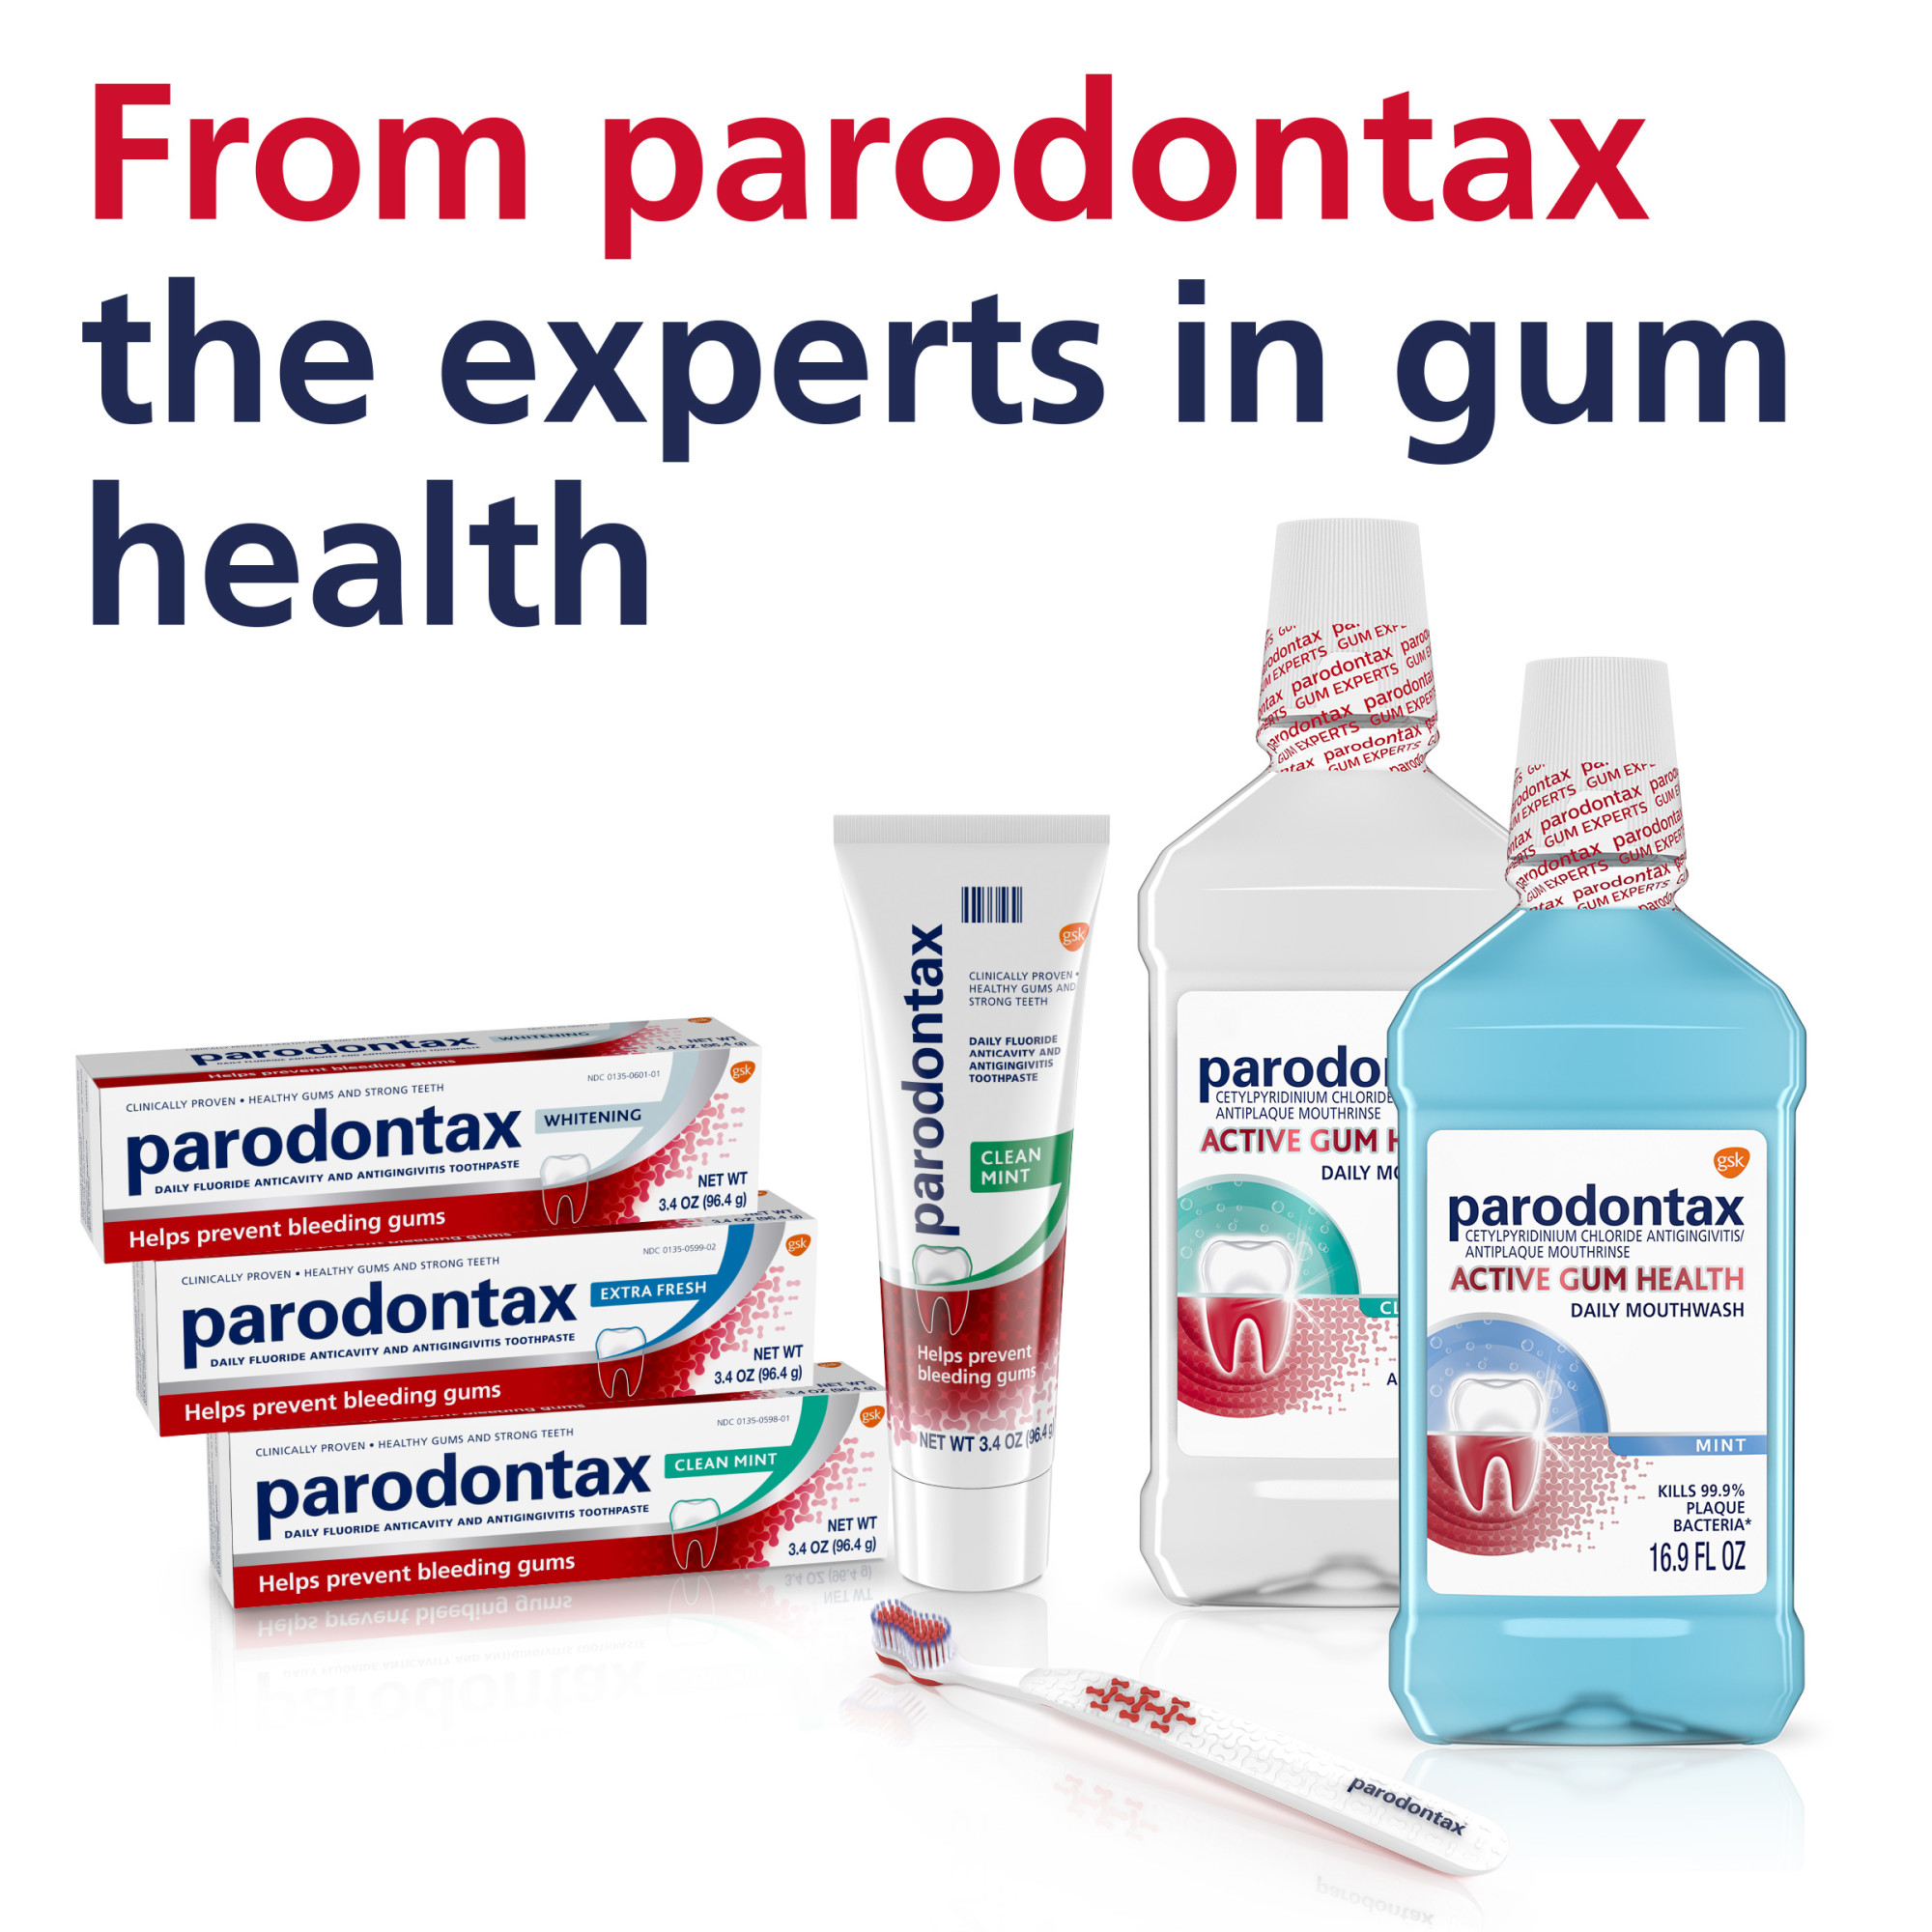 Parodontax Complete Protection Teeth Whitening Toothpaste for Bleeding Gums, 3.4 oz - Unflavored - image 10 of 11